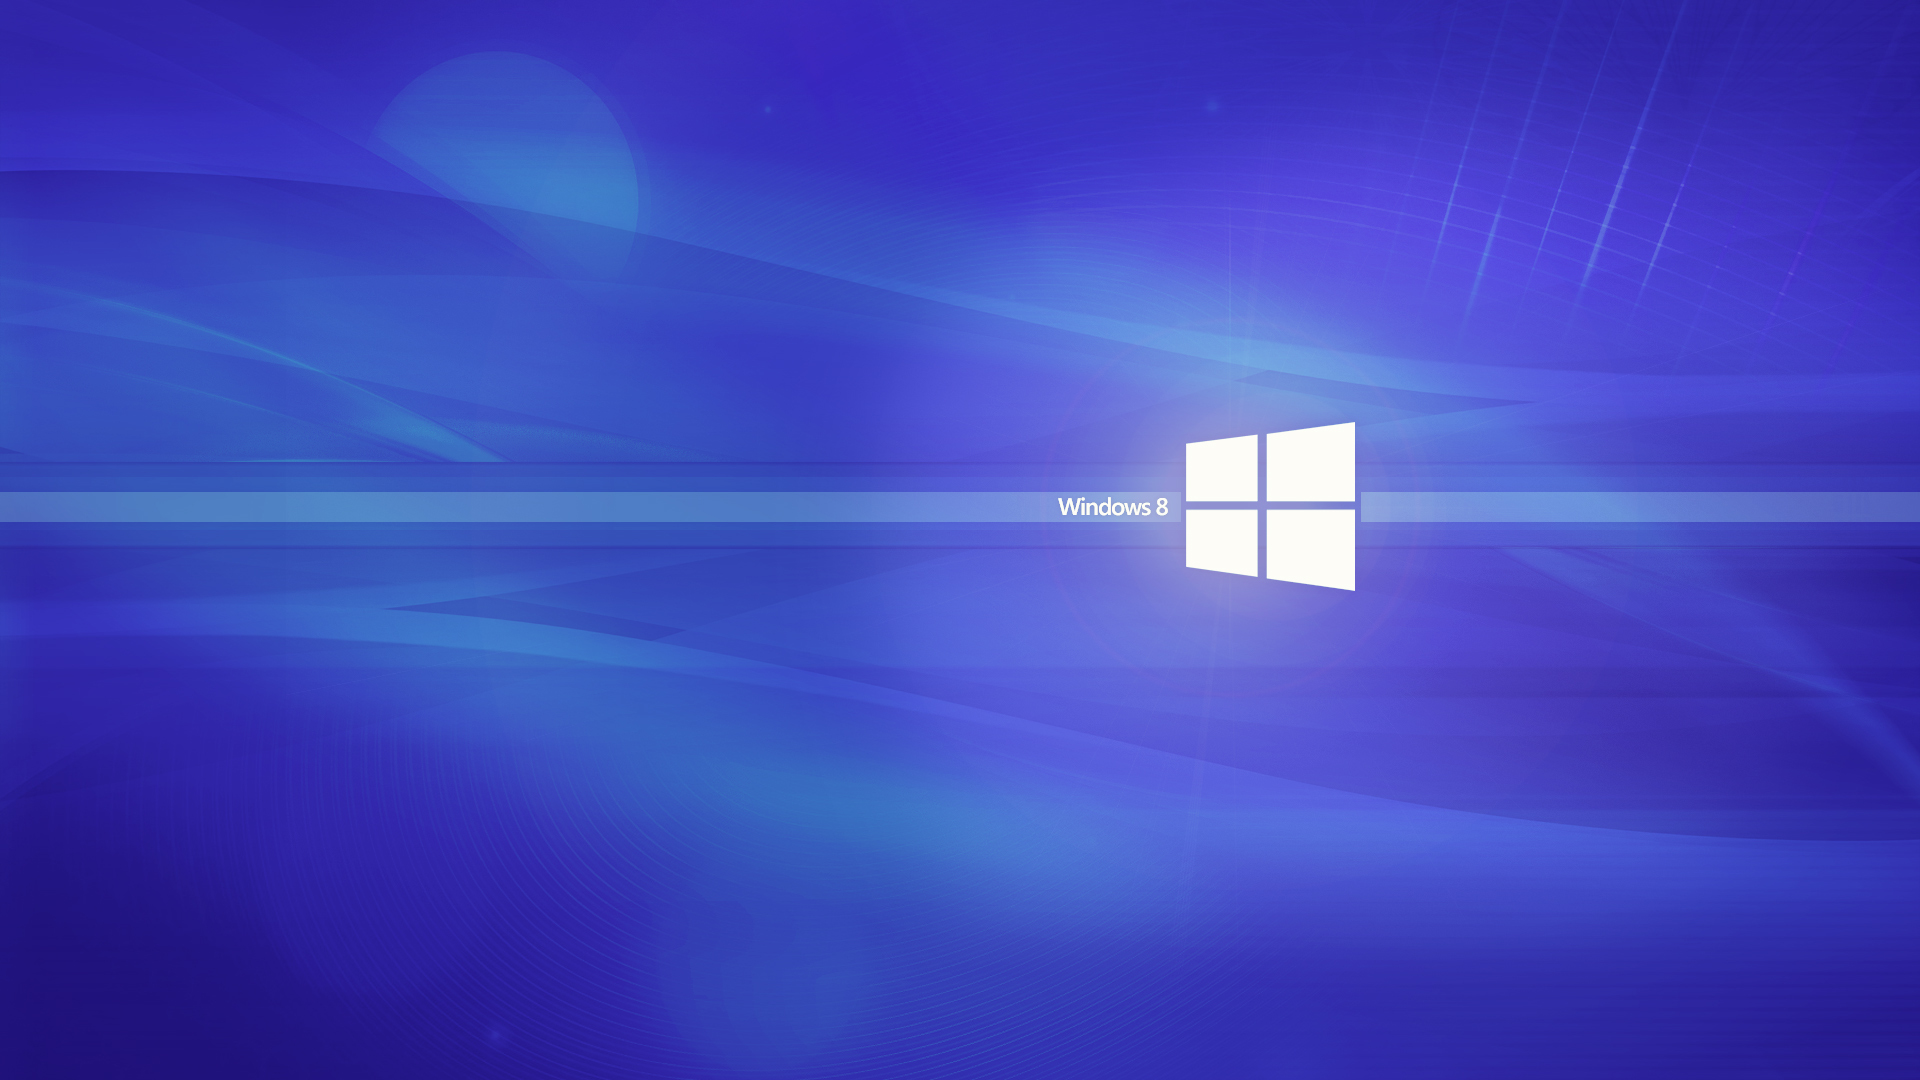 Symbol of Windows 8 wallpapers and images   wallpapers pictures